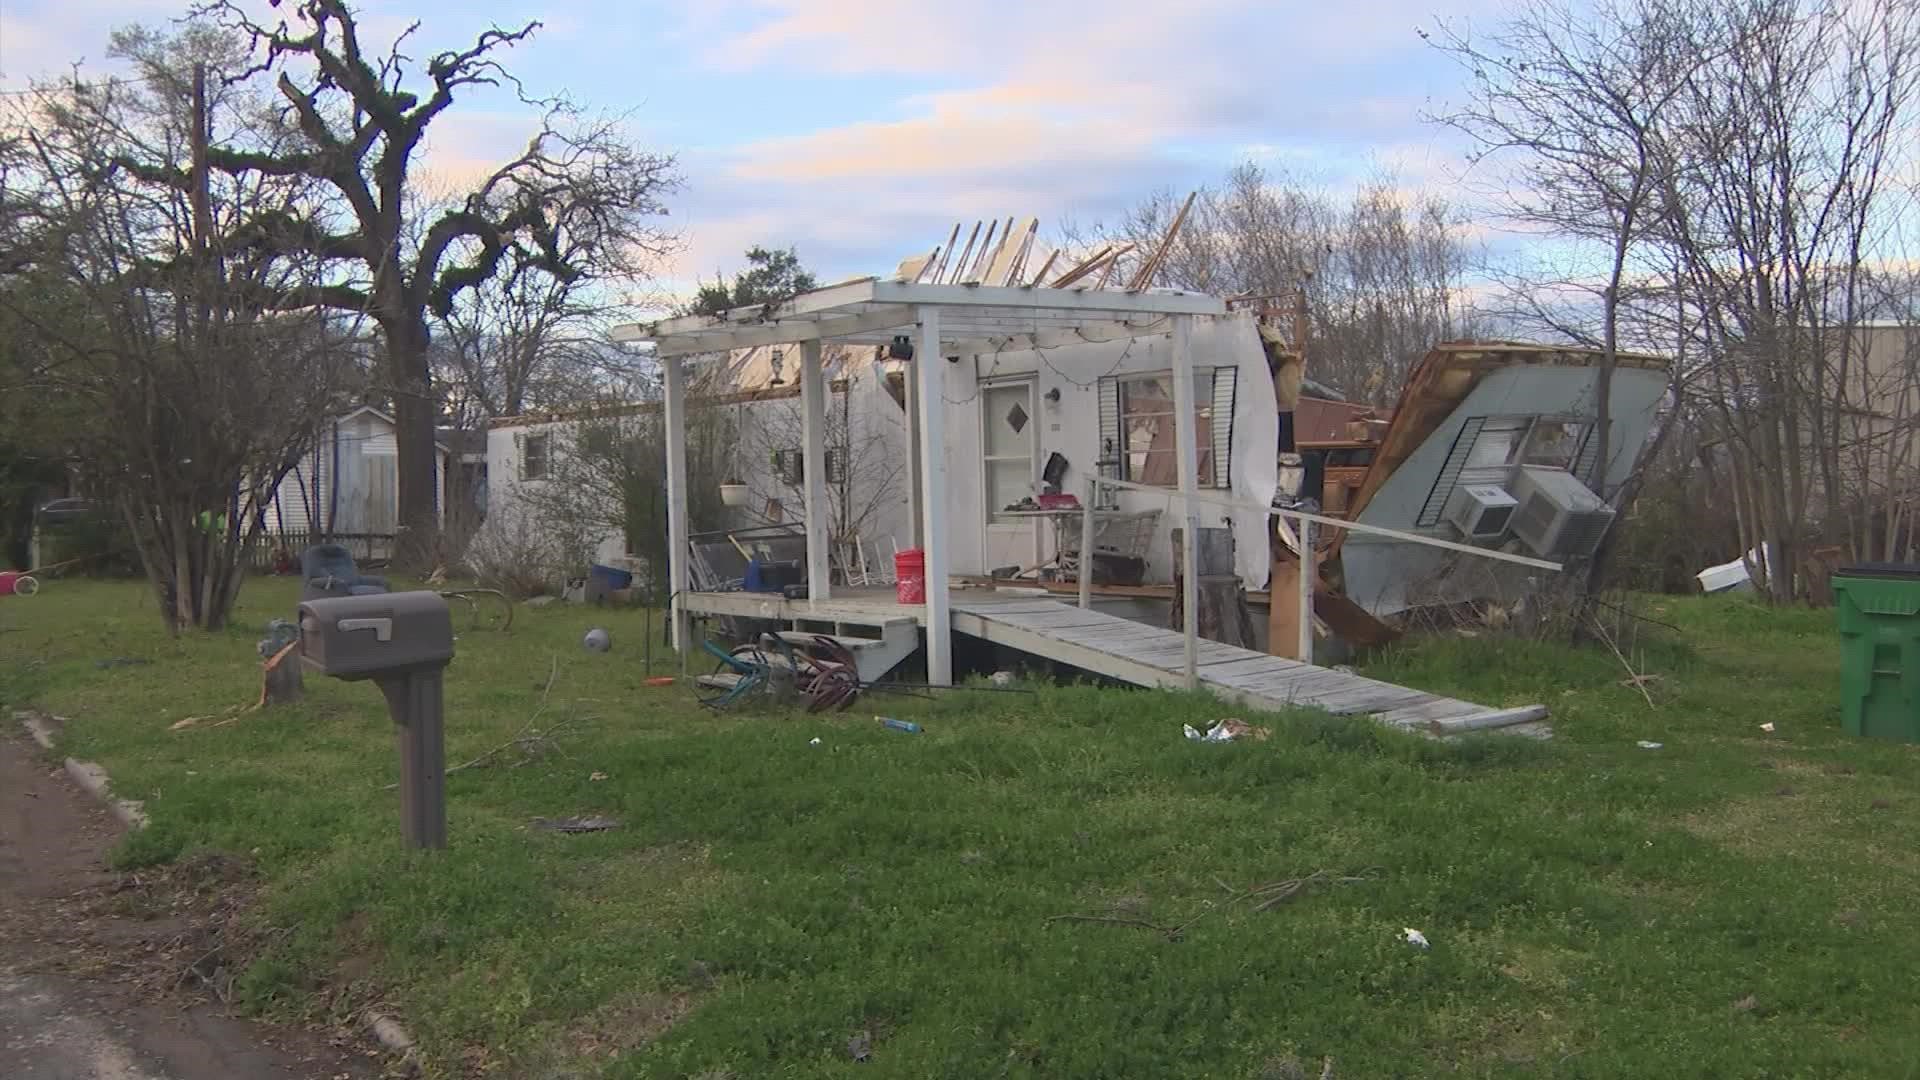 The NWS confirmed seven tornados in Southeast Texas between Monday night and Tuesday morning. Residents in Madisonville tell KHOU 11 that they're grateful to be OK.